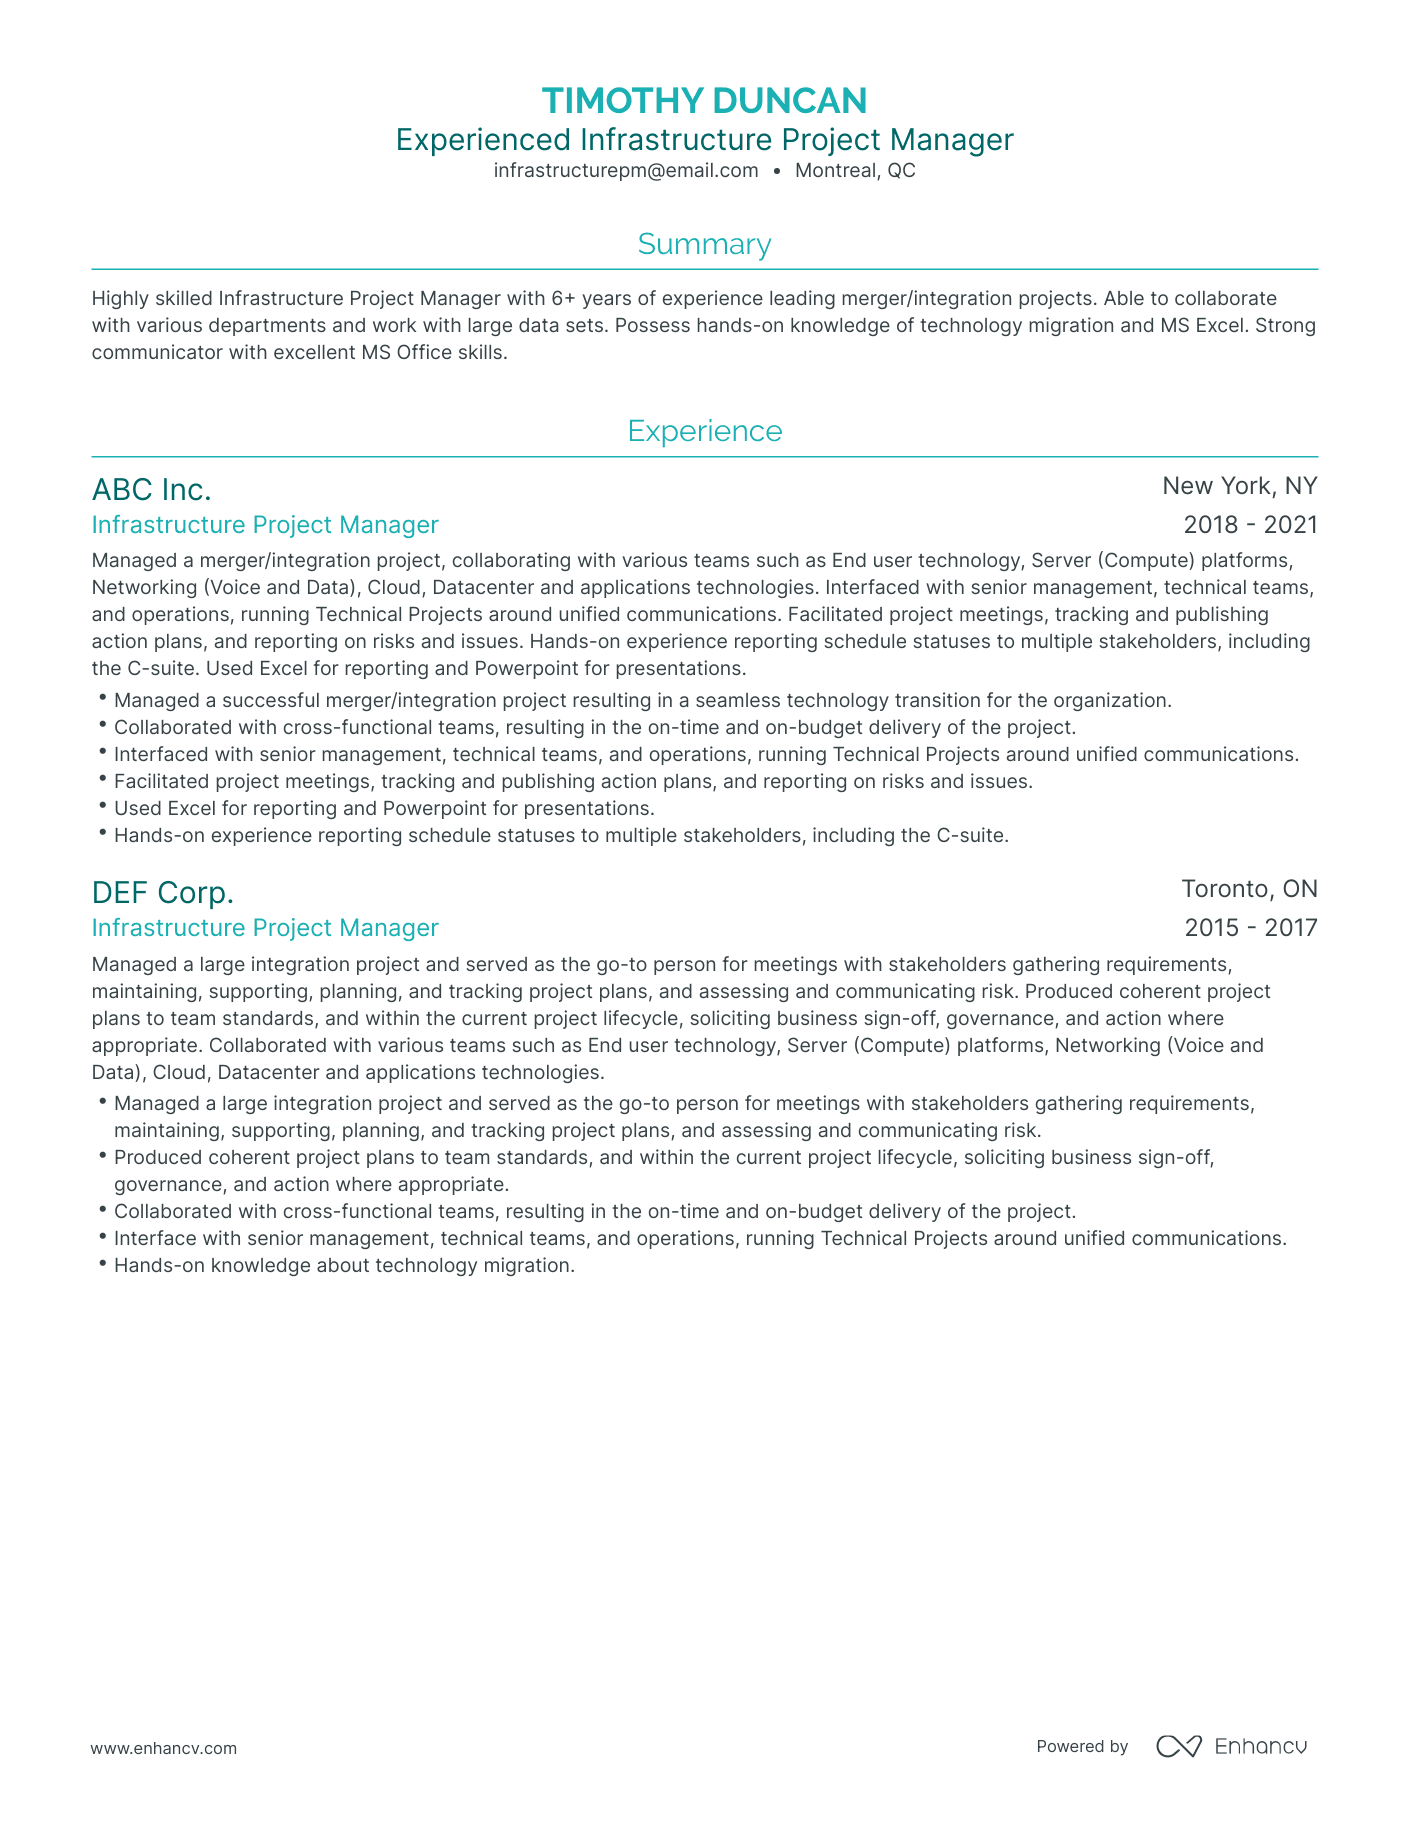 Traditional Infrastructure Project Manager Resume Template